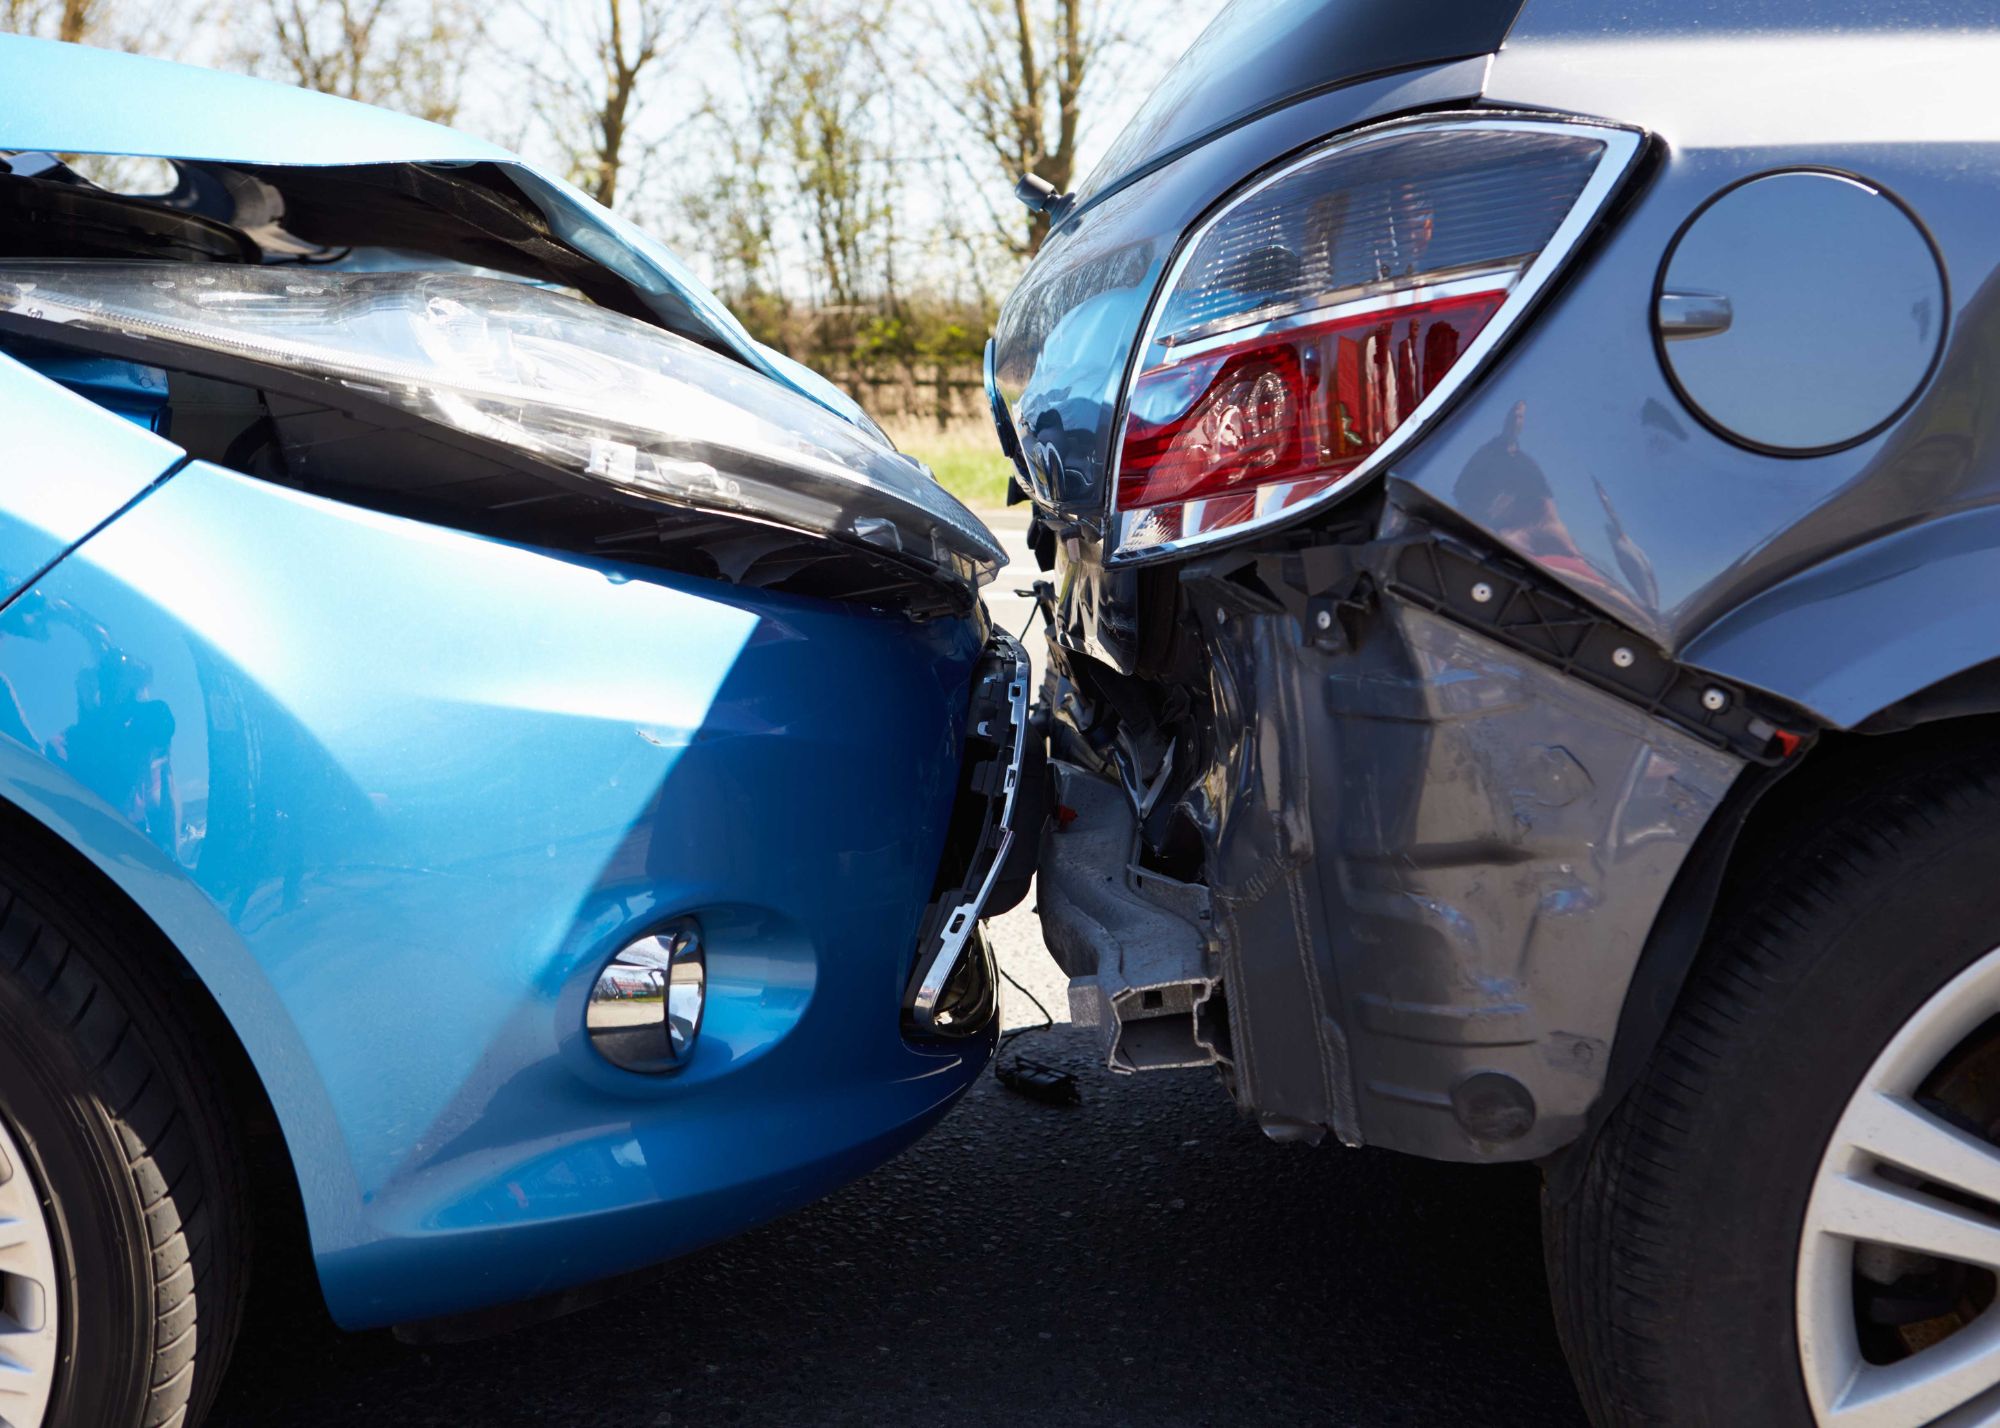 Understanding just what is SR22 Car Accident Insurance options for Little Rock residents